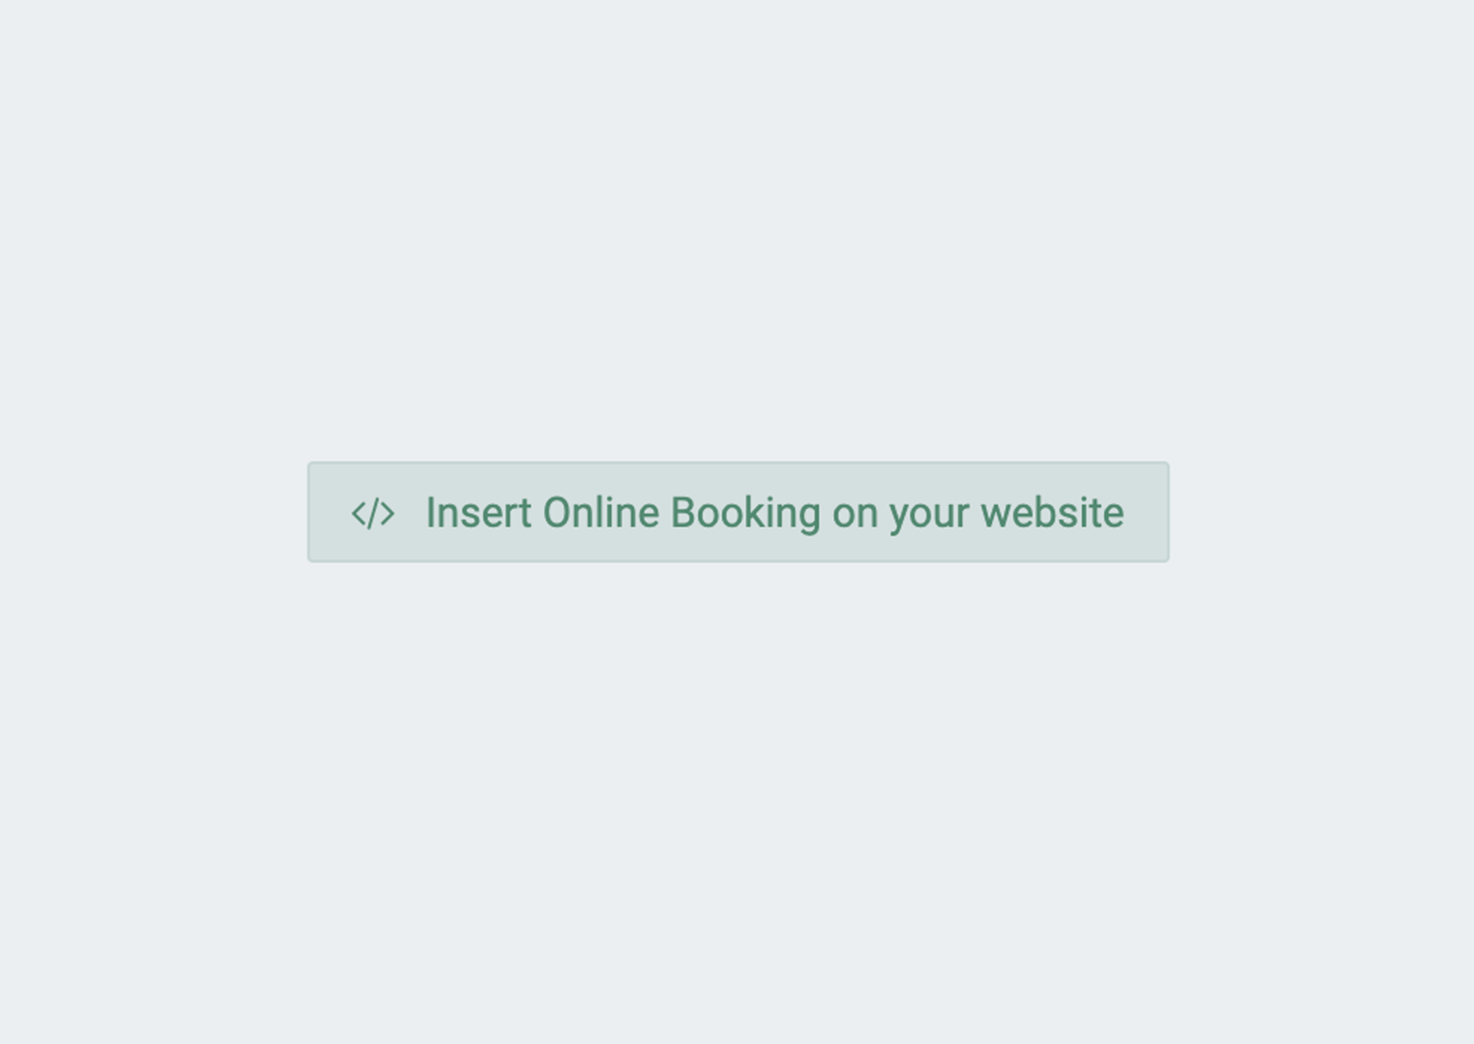 Image stating "Insert Online Booking on your website"